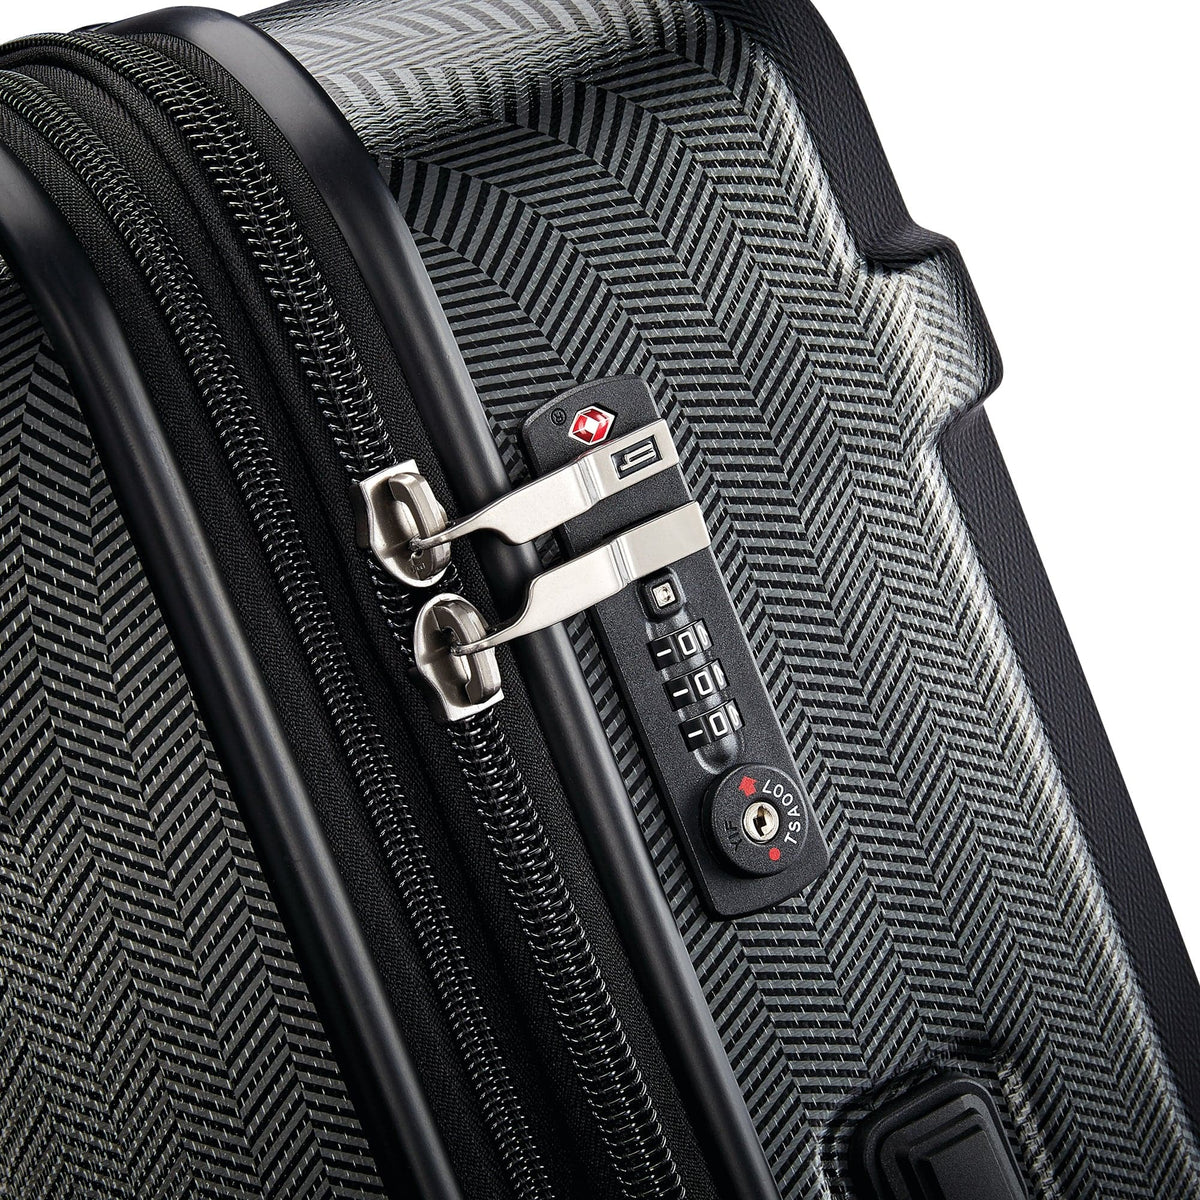 Hartmann Century Deluxe Hardside Extended Journey Expandable Spinner Luggage